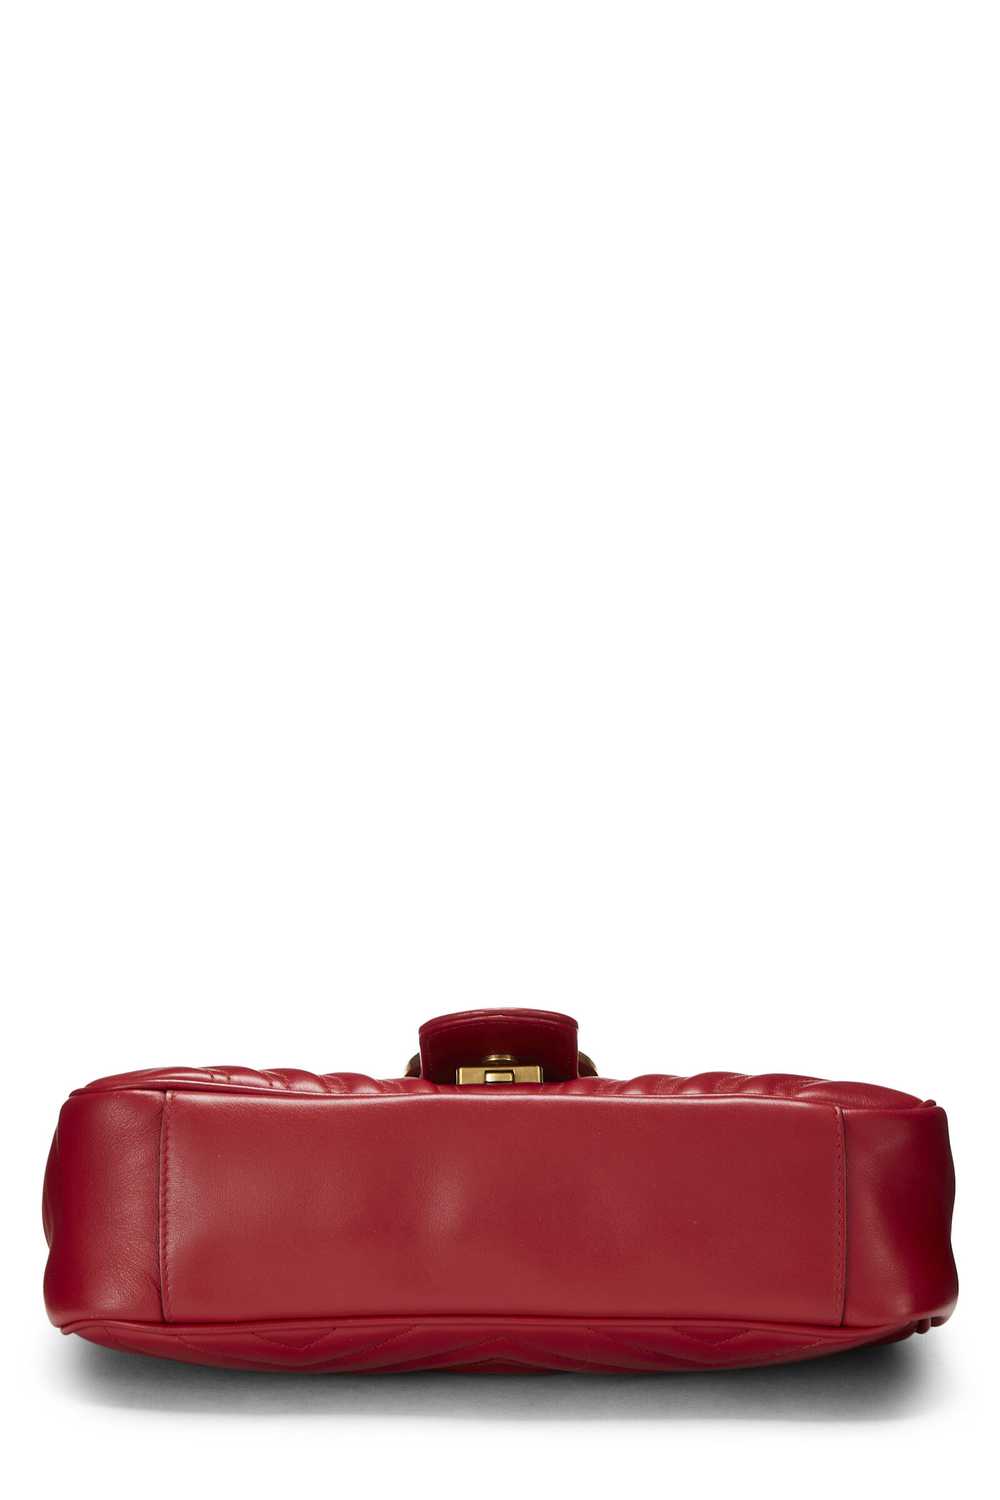 Red Leather GG Marmont Shoulder Small - image 6